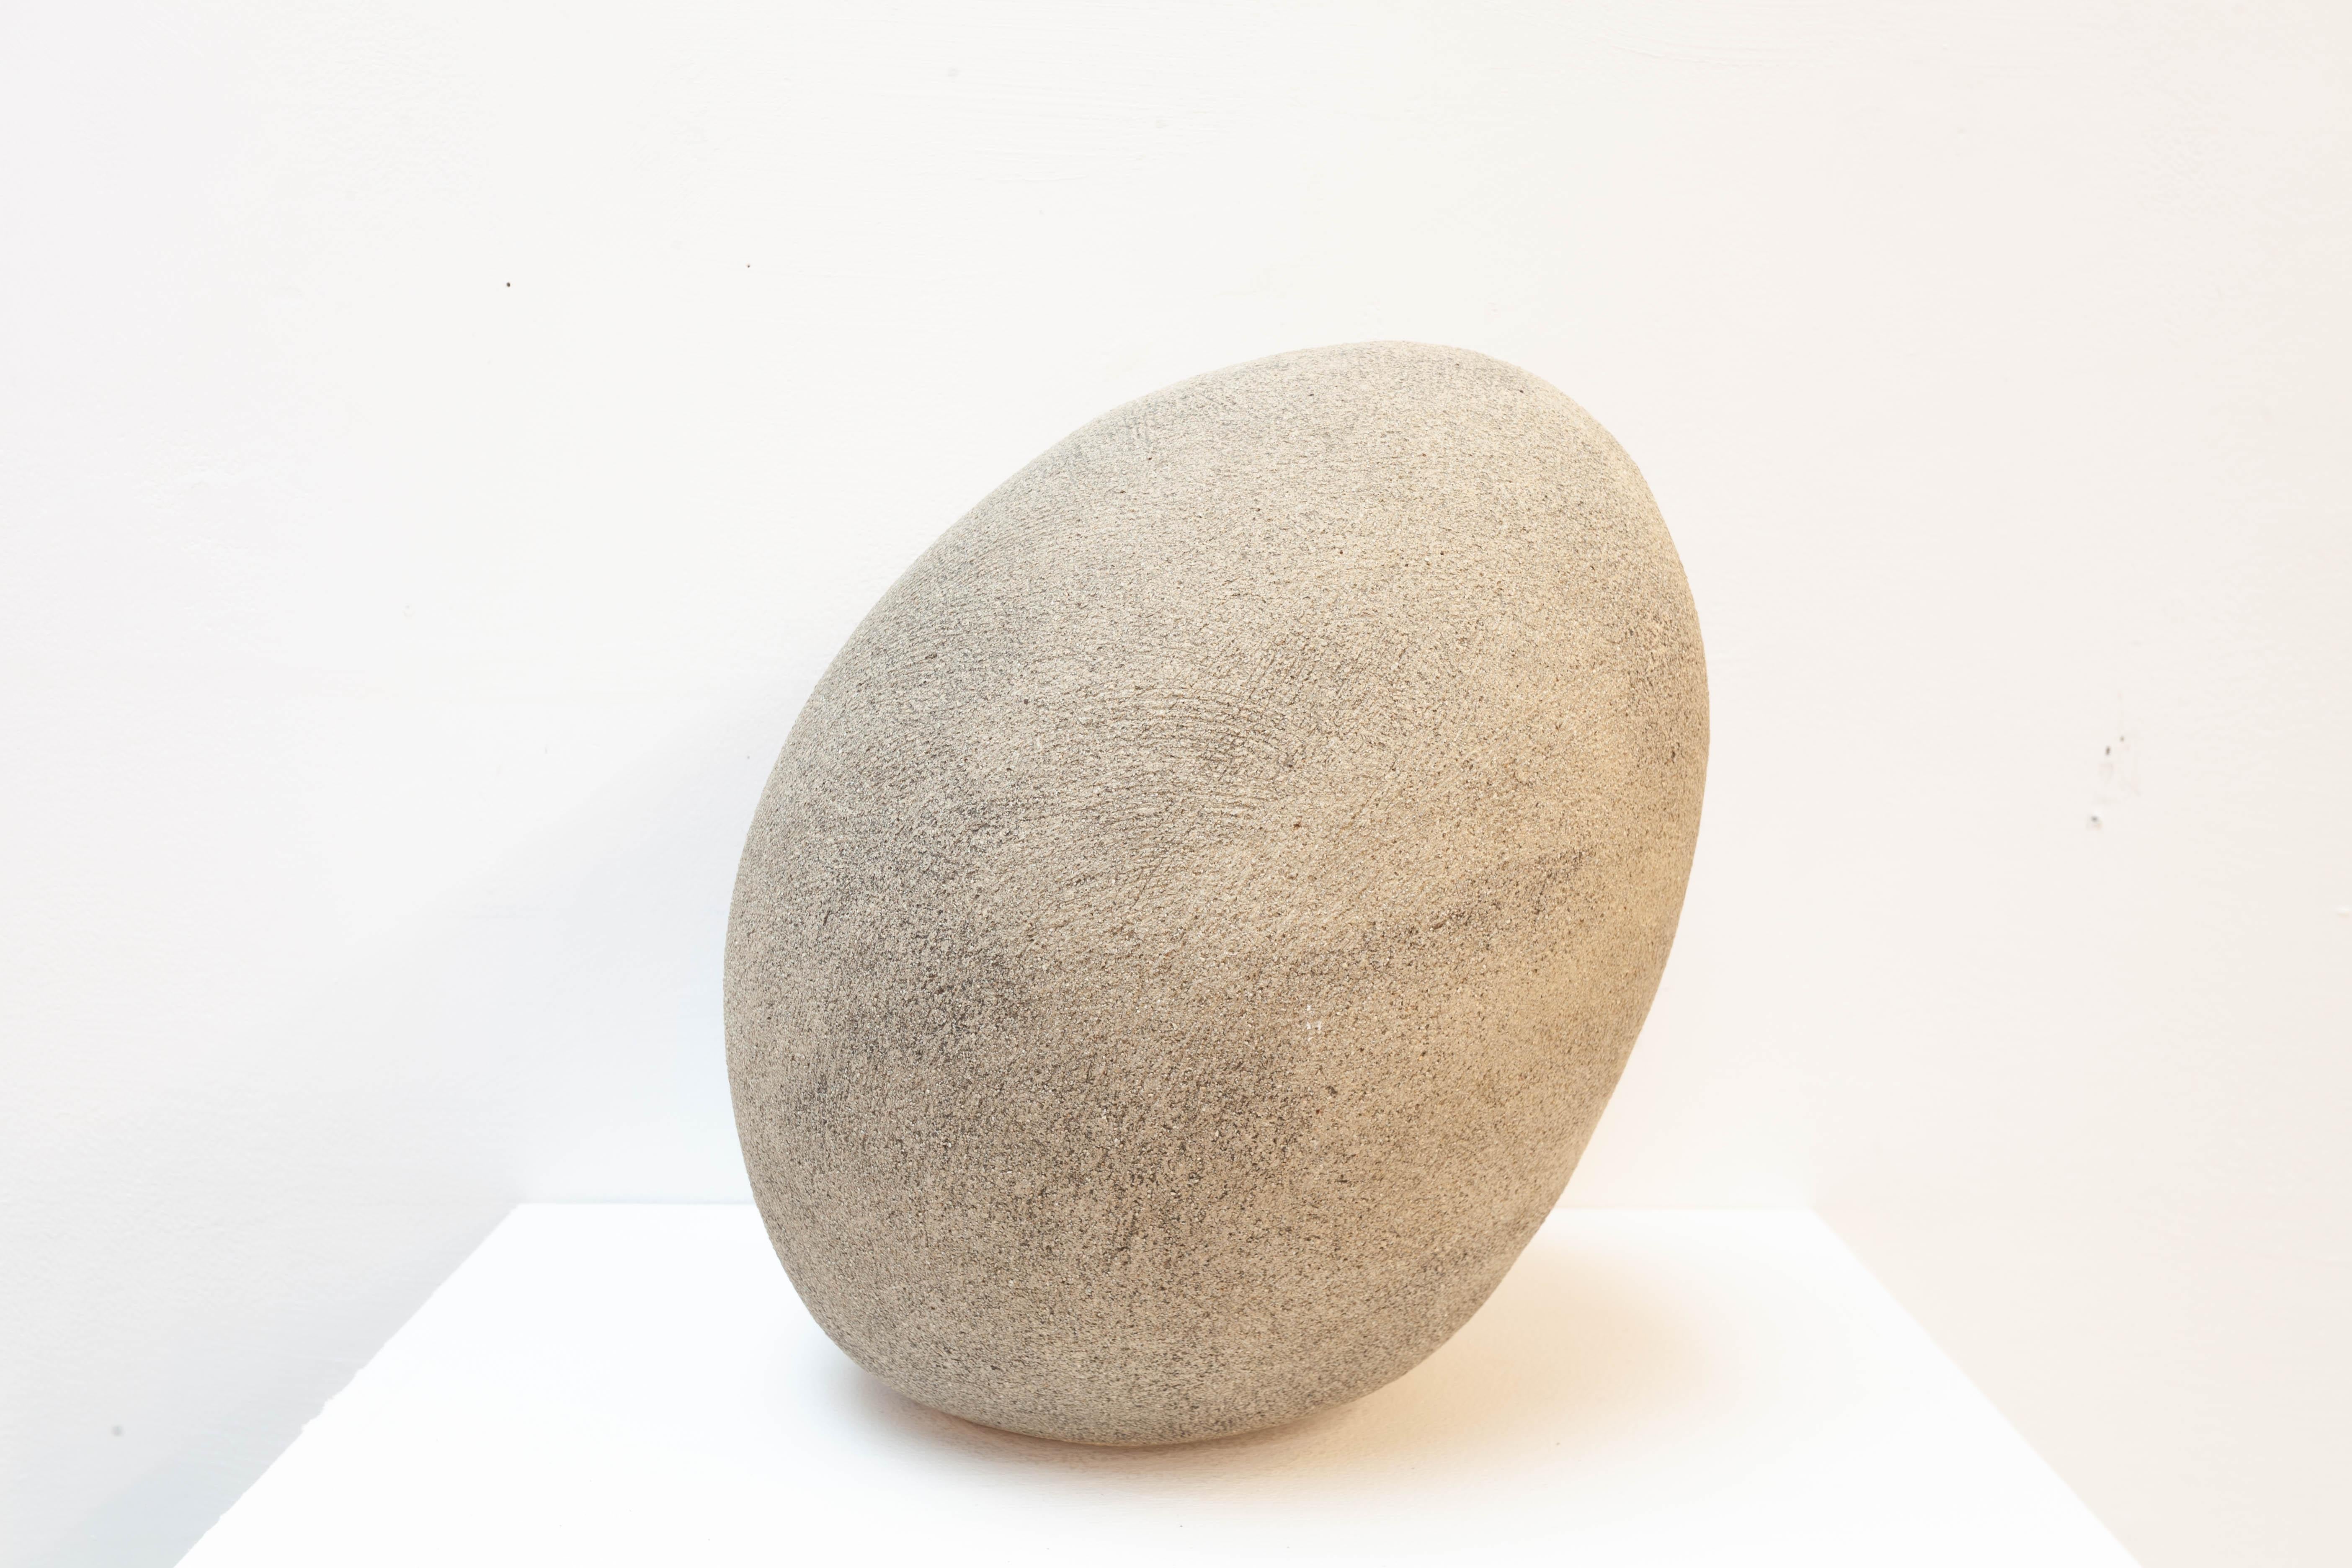 Lopsided Pot - White Abstract Sculpture by Alison McGechie